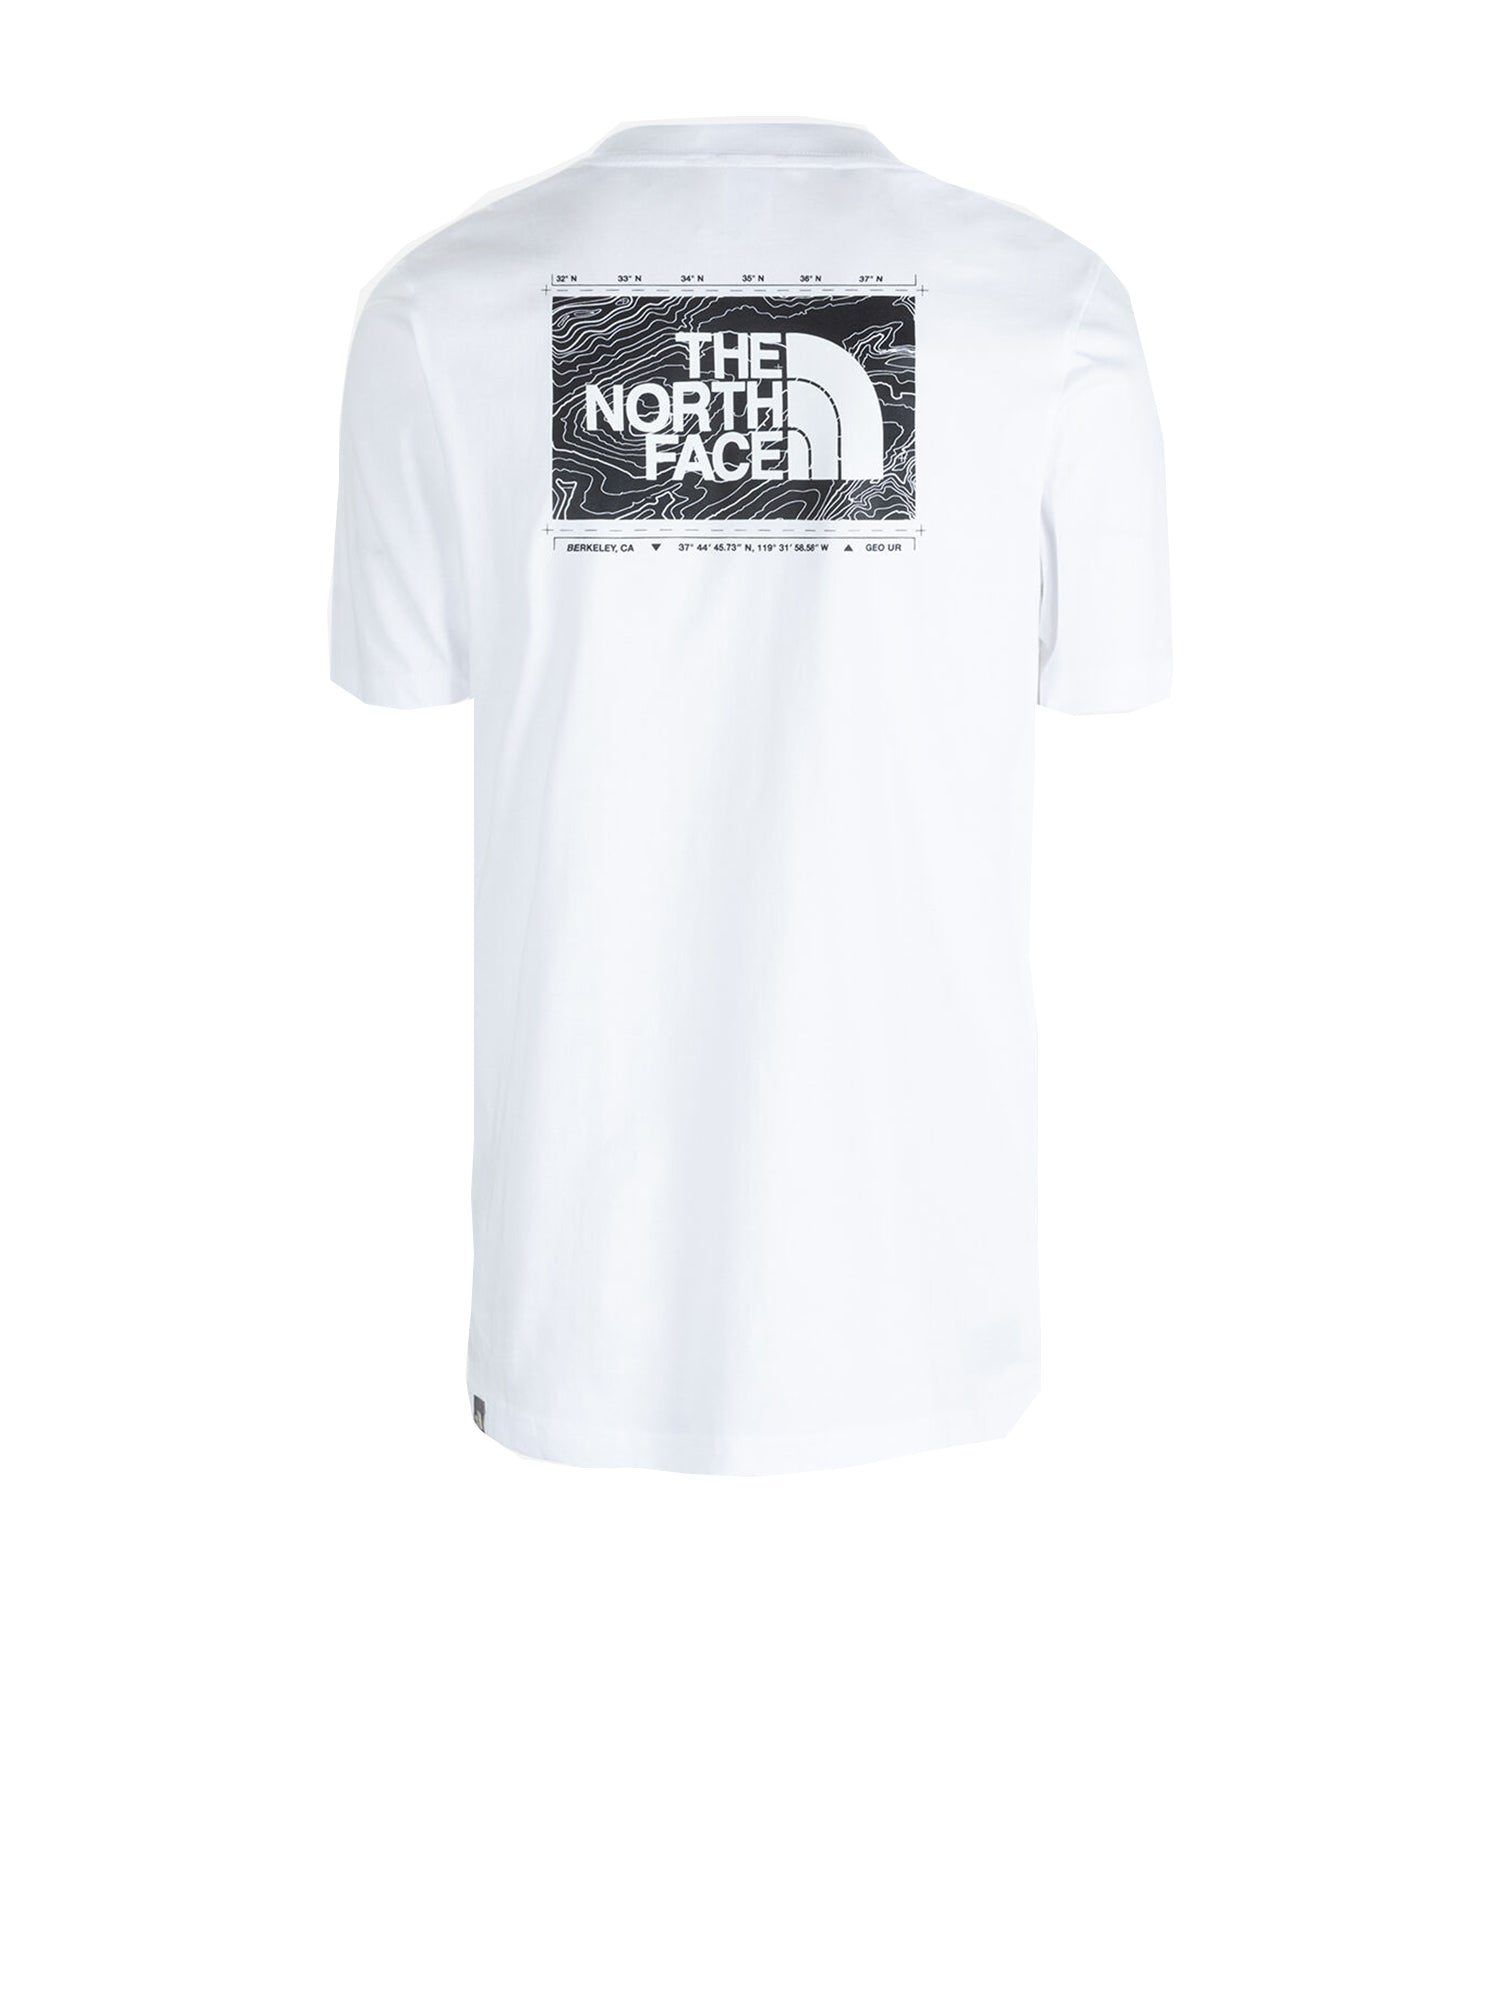 THE NORTH FACE T- SHIRT NEW ODLES BACK LOGO BIANCO